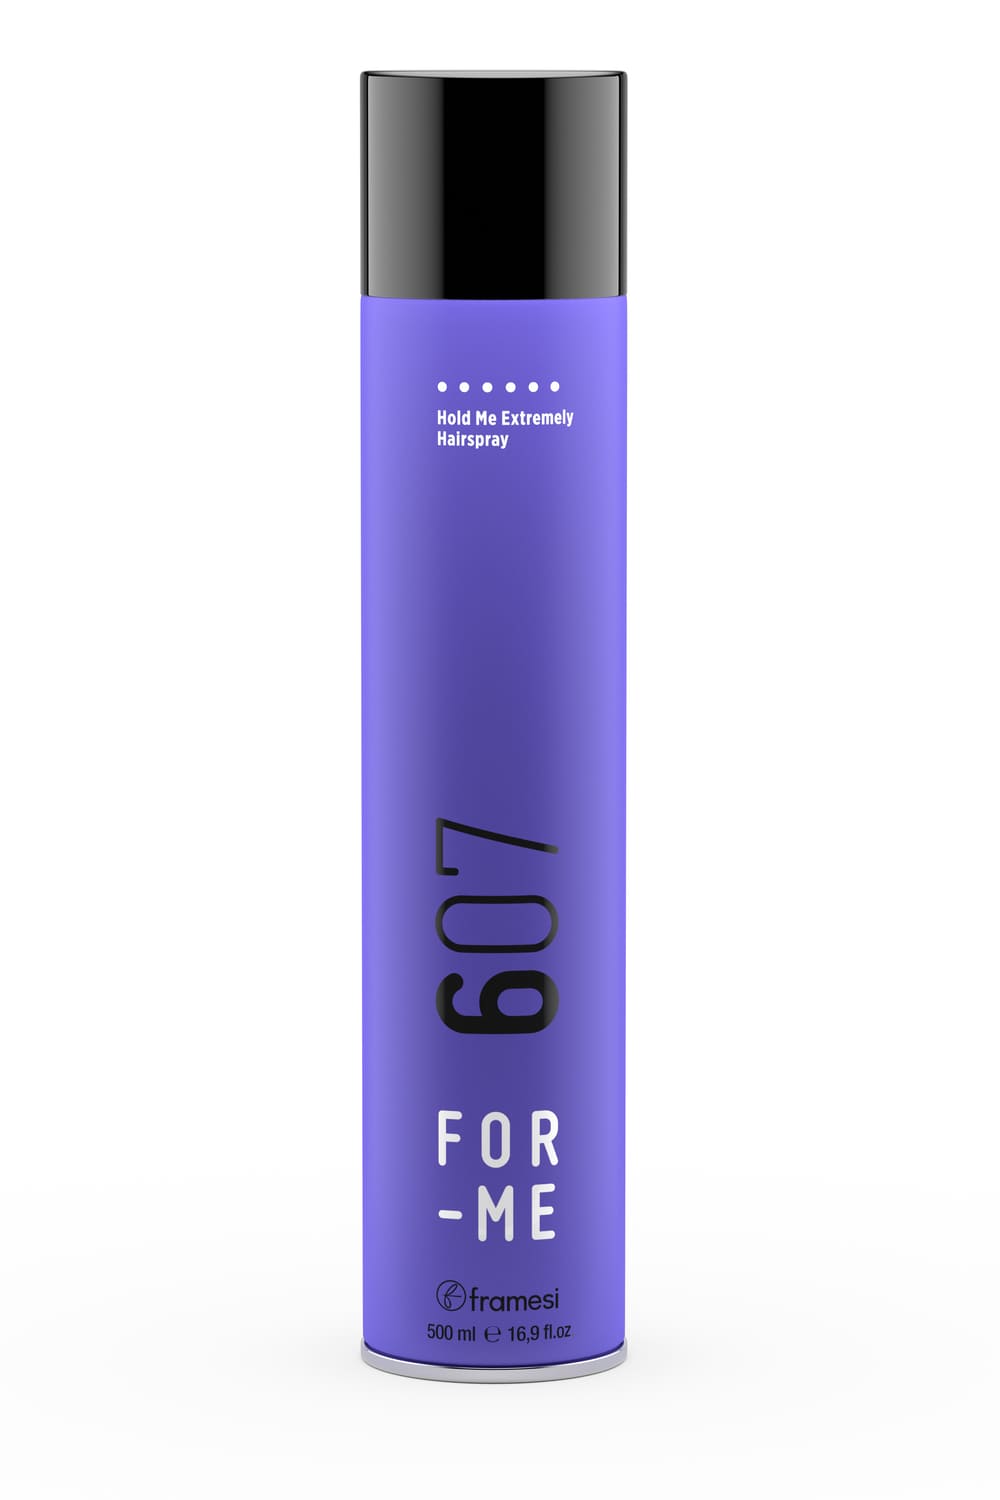 FOR ME_607_HOLD ME EXTREMELY HAIRSPRAY_500 ML